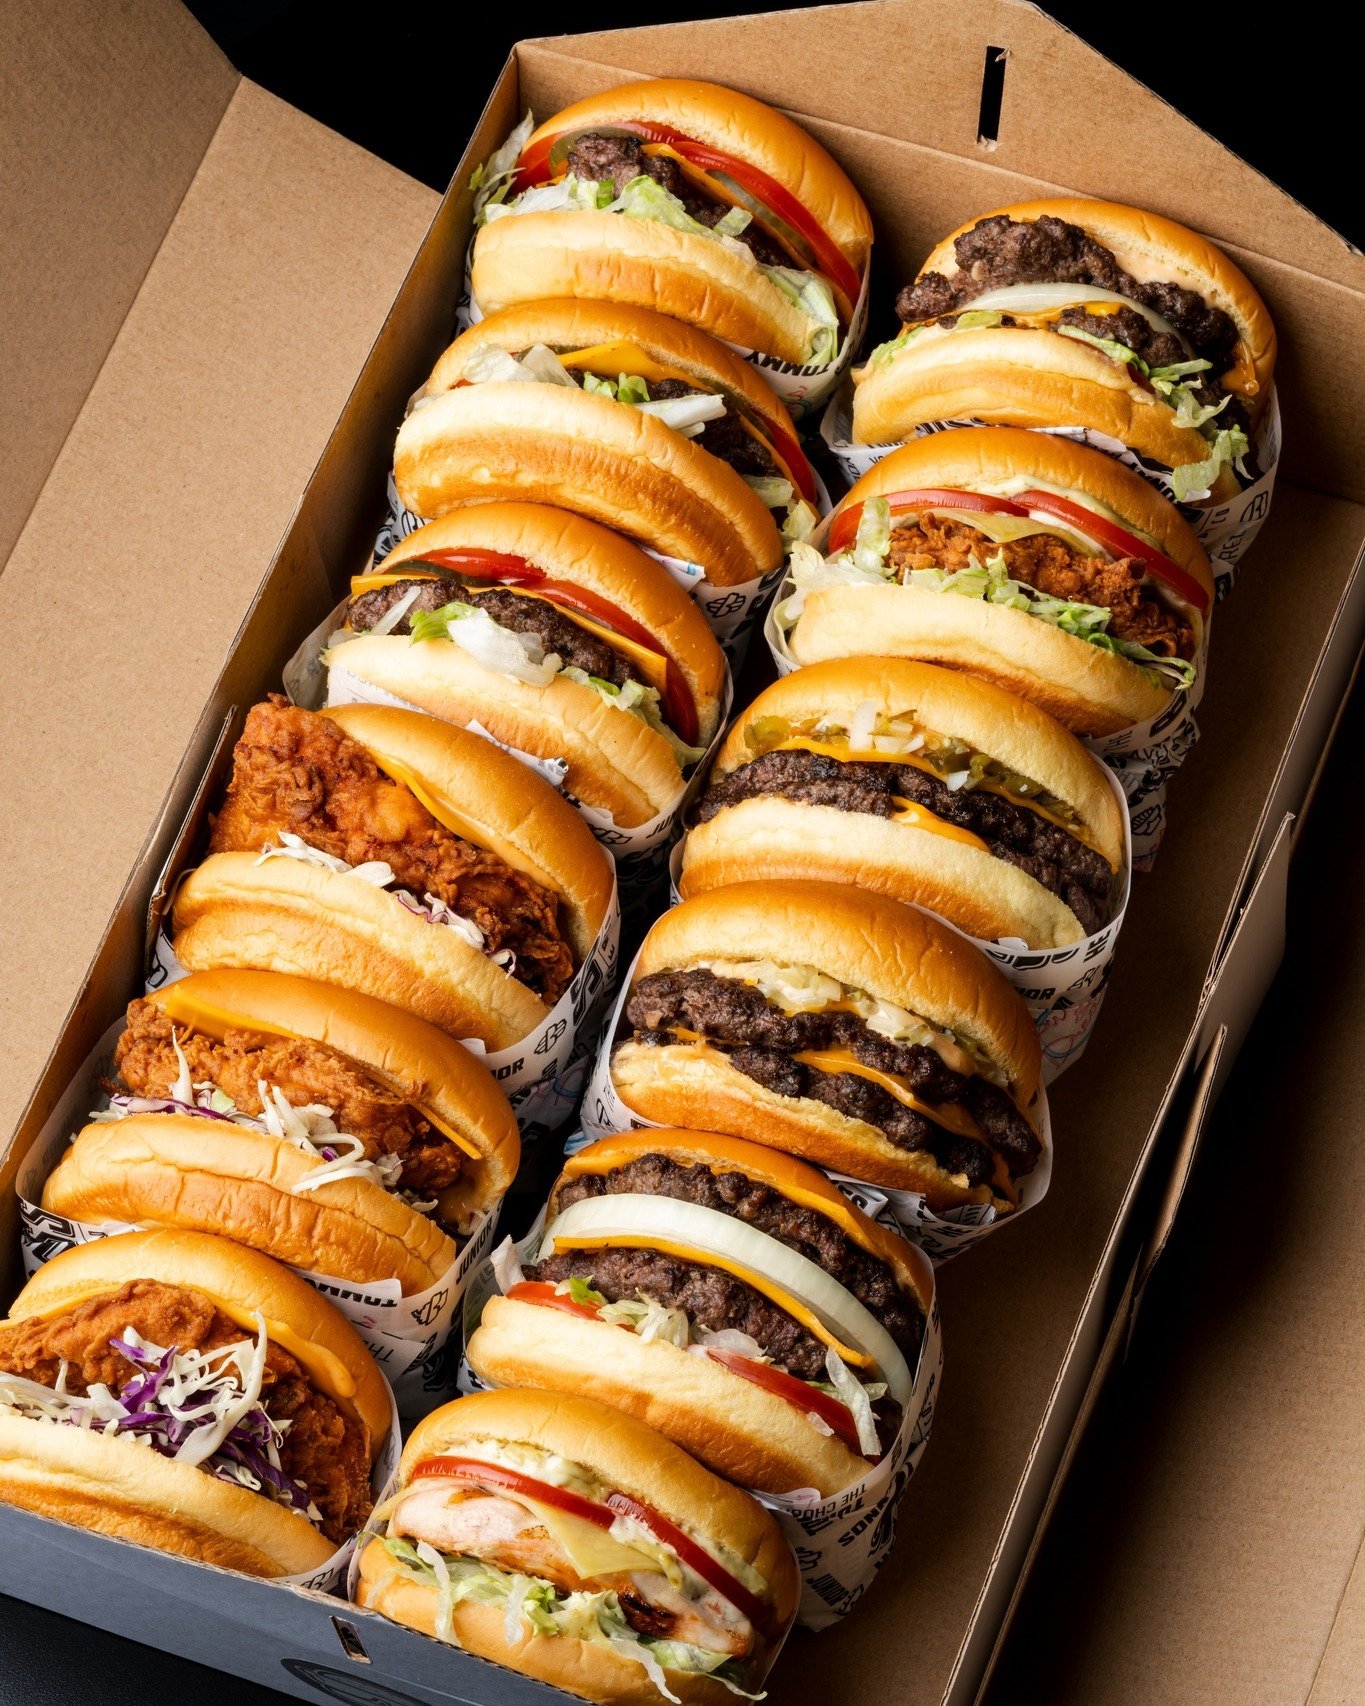 Got a birthday or event on the radar? Don't sweat the grub&mdash;Boss Burger Catering has your back! Get in touch with us at bossburgerco@gmail.com for large orders or catering.